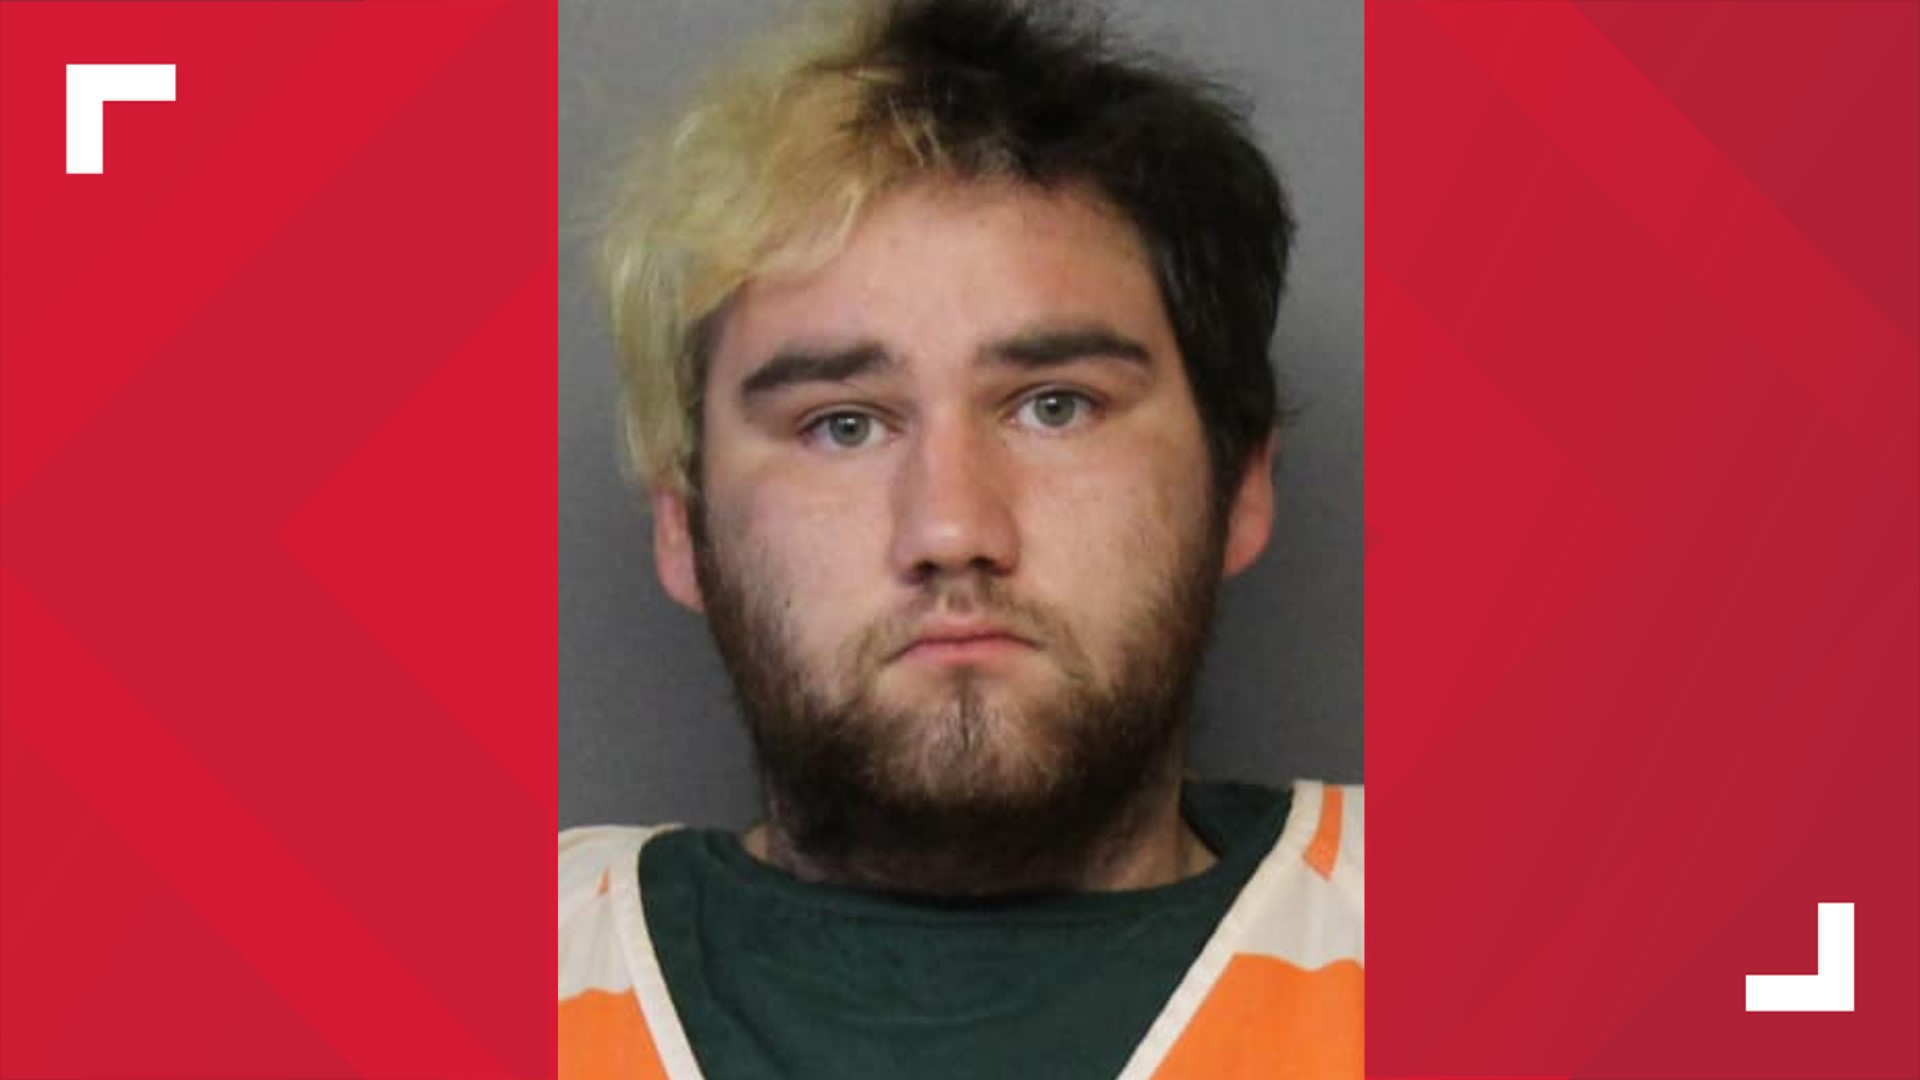 Sean Campbell, 22, has been arrested and charged with two counts of aggravated assault with a deadly weapon in connection with the shooting.